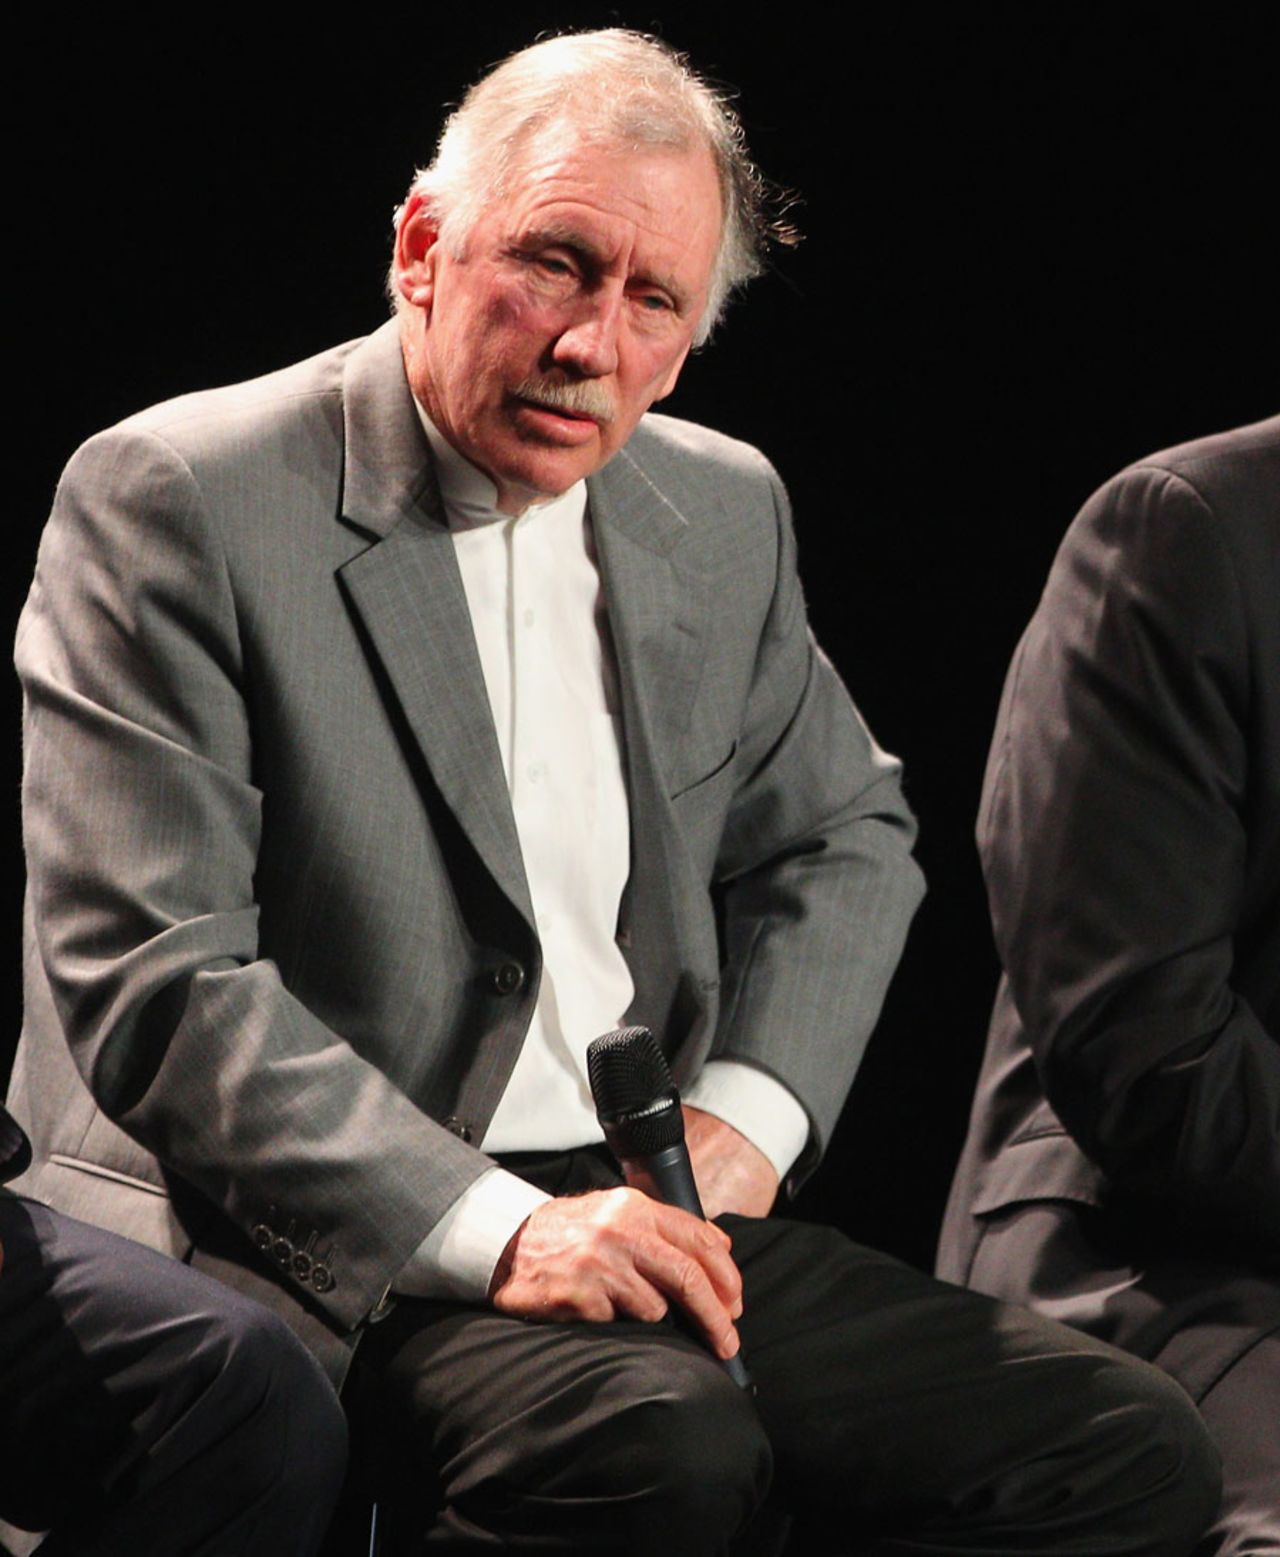 Ian Chappell at the 2015 World Cup launch in Melbourne, Melbourne, July 30, 2013